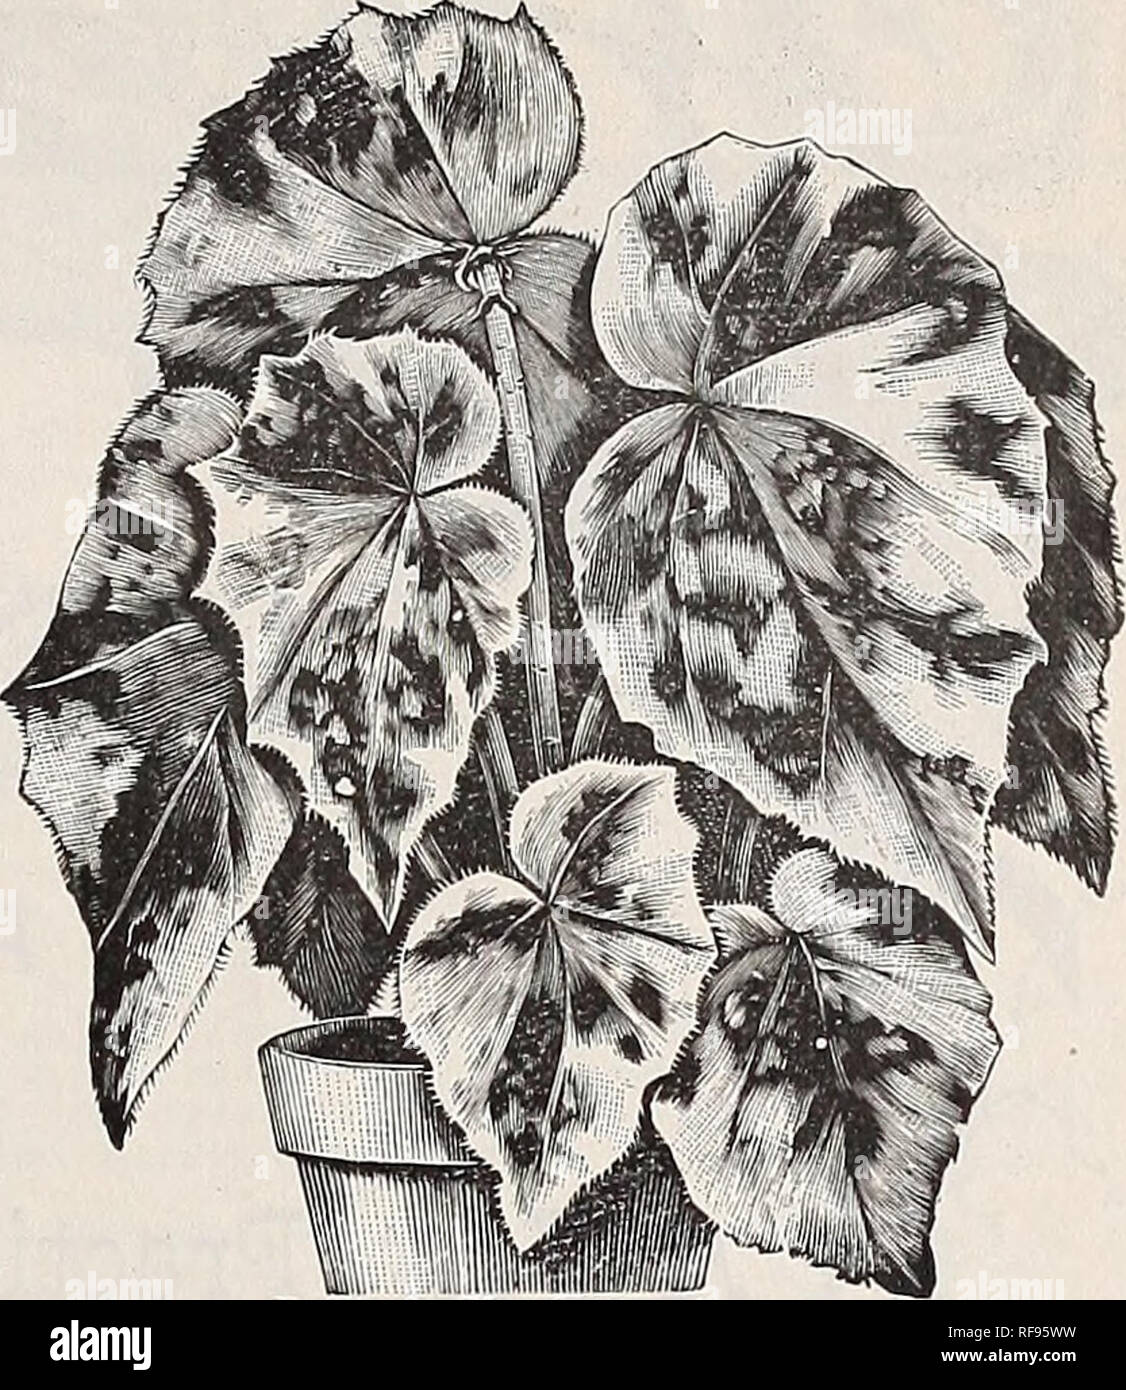 . [Catalogue of] Cottage Rose Garden, 1889. Nursery stock Ohio Catalogs; Flowers Catalogs. Begonia Argcutea Guttata. Begonia Argentea GuttataâThis beautiful sort has the silvery blotches of Alba Picta, and the grace and beauty of growth â of Olbia. It has purple bronze leaves, obiong in shape, with silv- ery markings, and in every way a most beautiful Begonia. It pro- duces white flowers in bunches on ends of growth stems. It will be splendid for house culture. Illustration gives a good idea of its habit and form, see cut. 75 cents each. Ready in March. Begonia Countess Xioulse ErdodyâThis is  Stock Photo